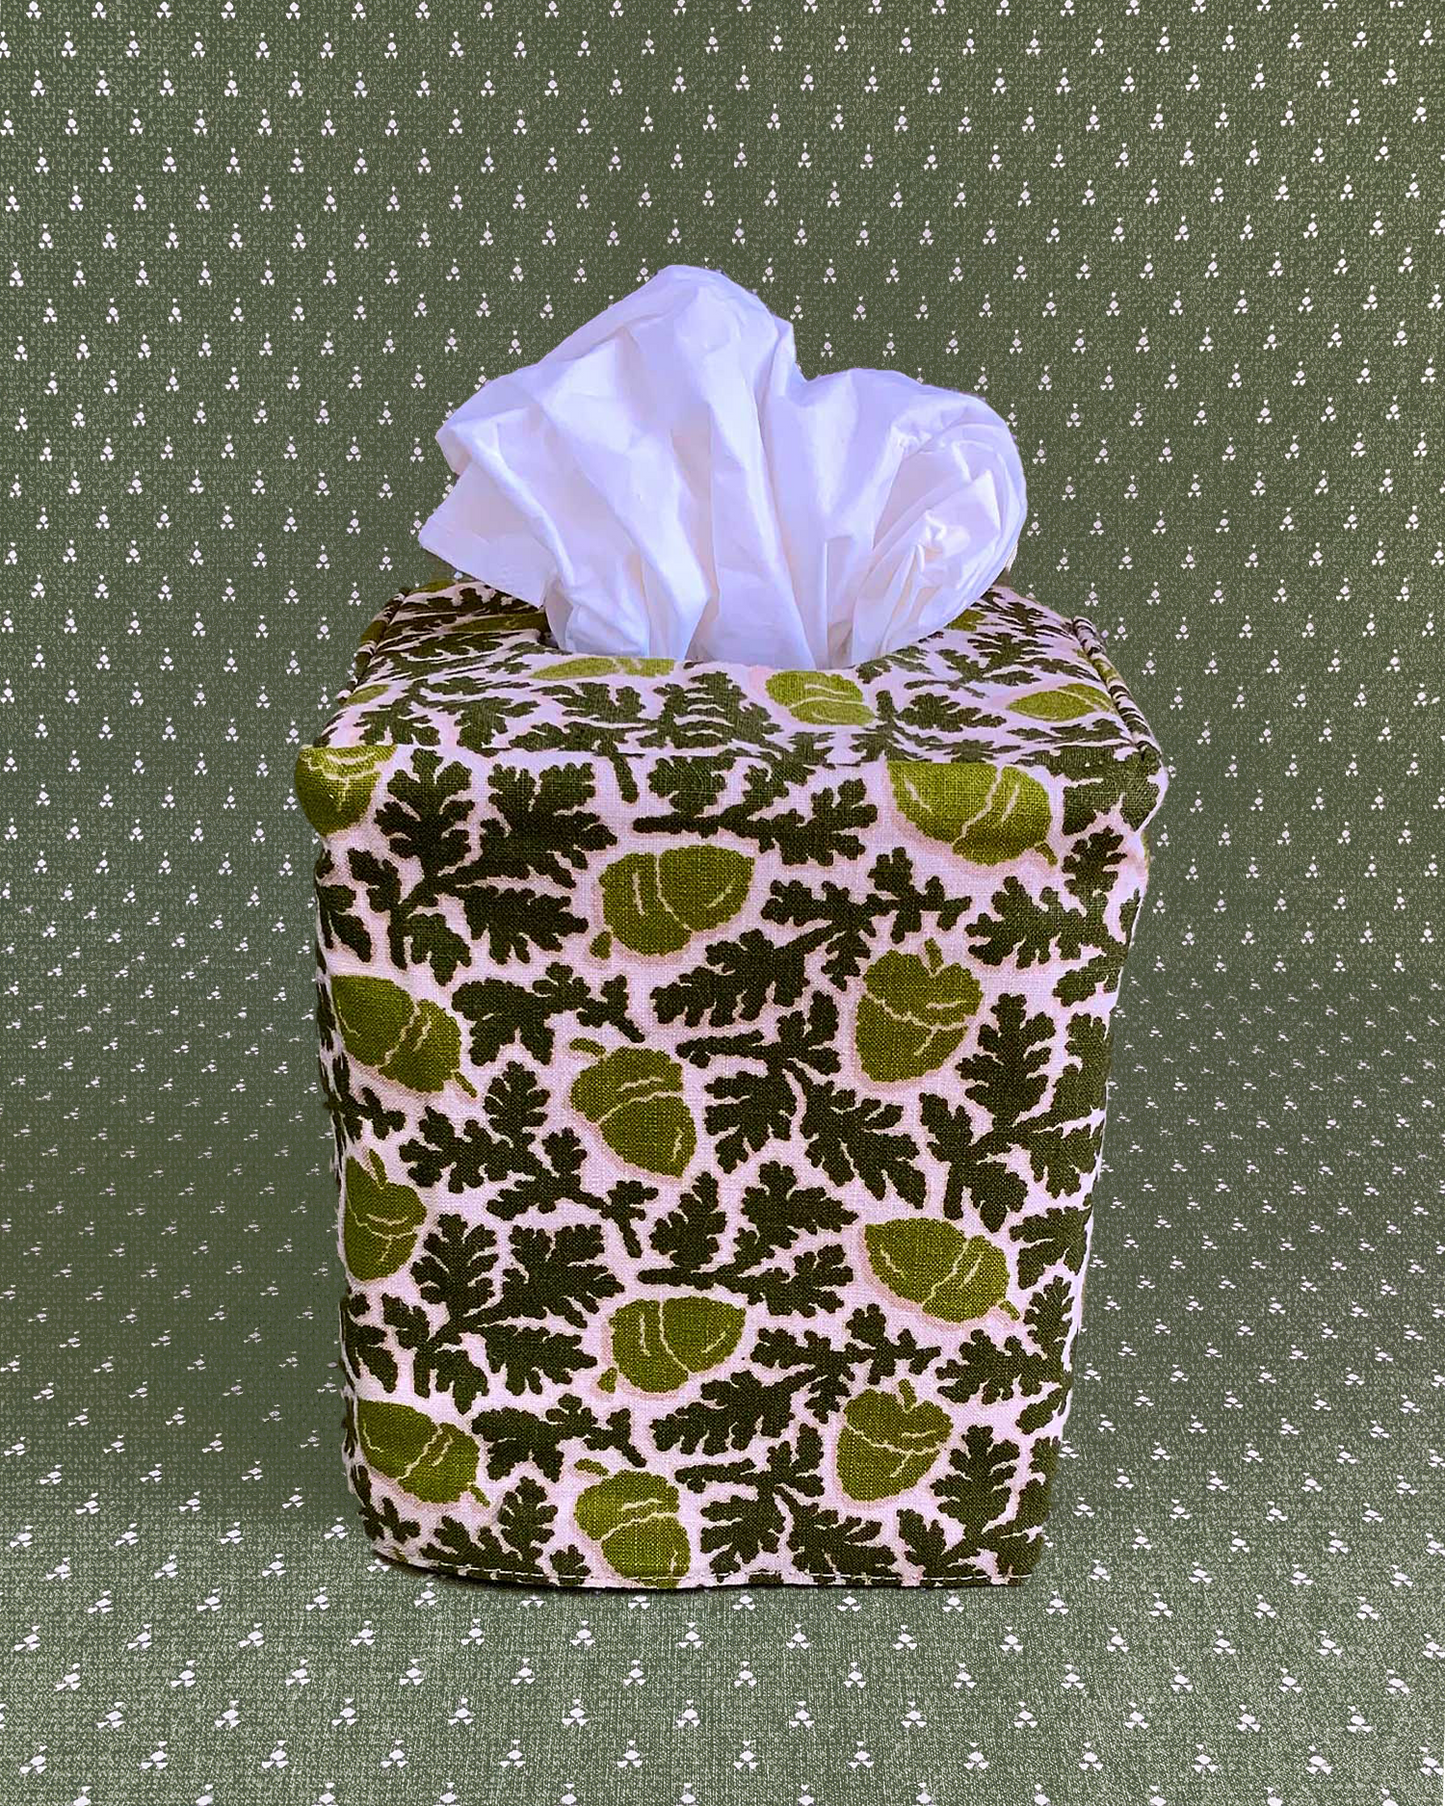 Tissue Box Cover “Acorn” in green/chartreuse